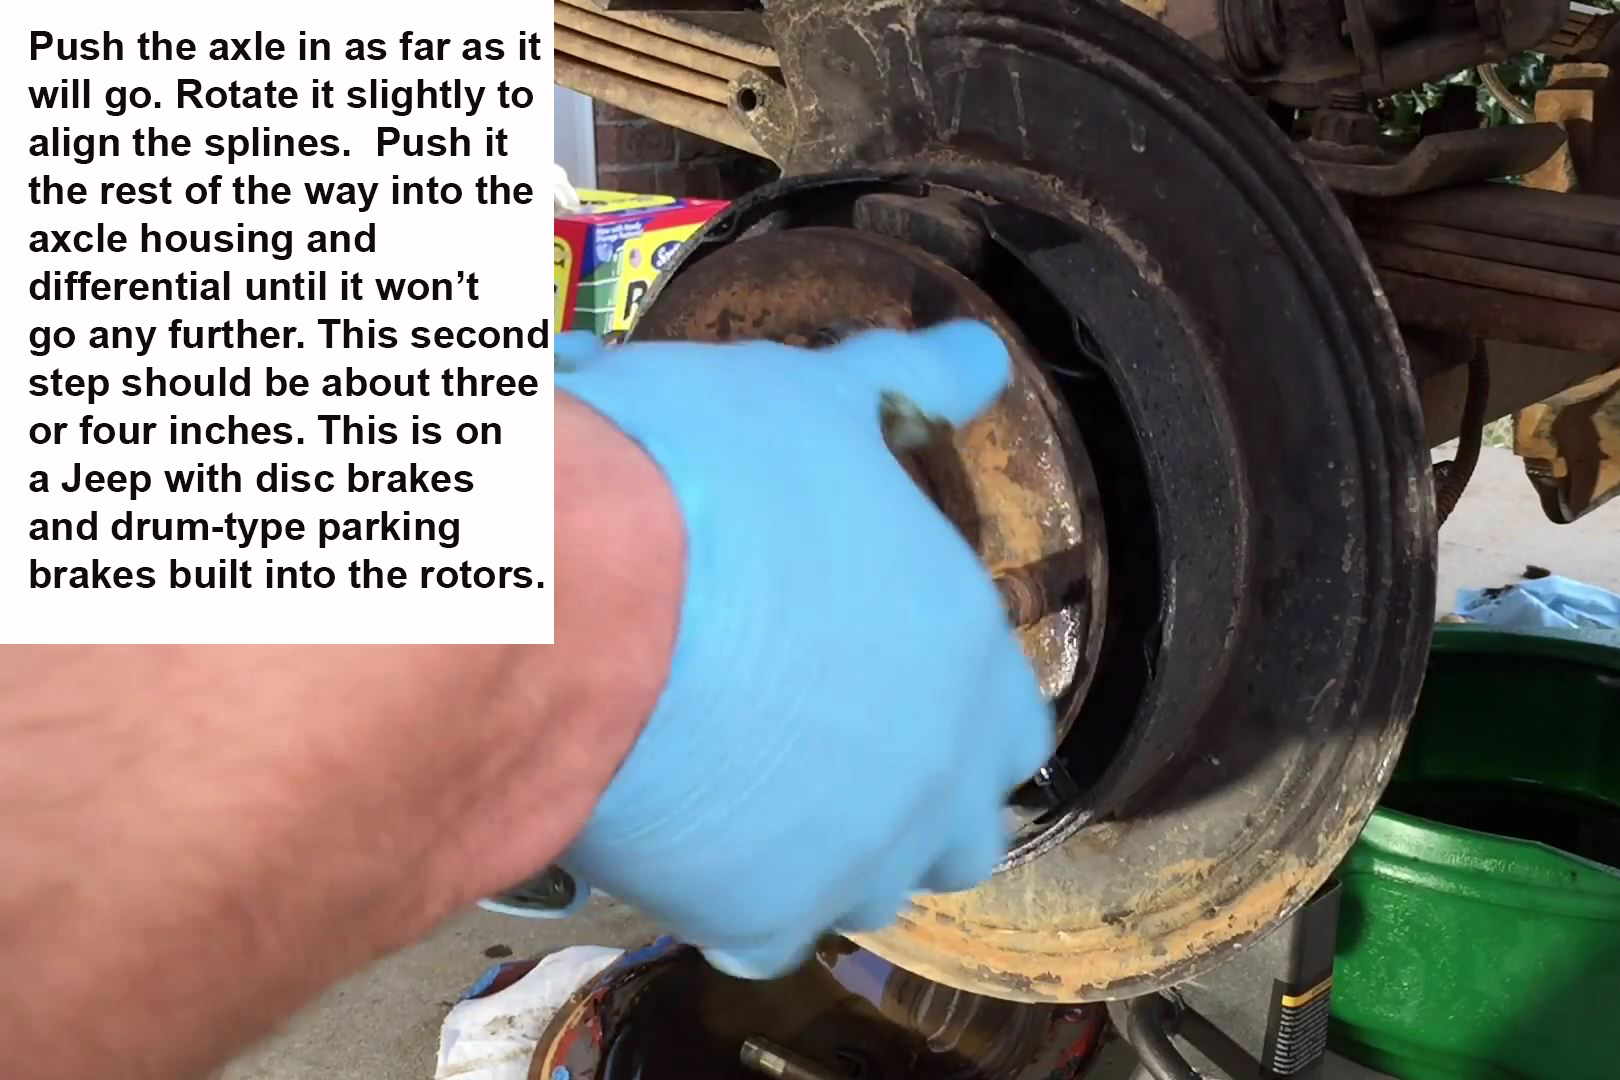 Installing New Axles in Your Chrysler 8 ¼ Inch Rear End